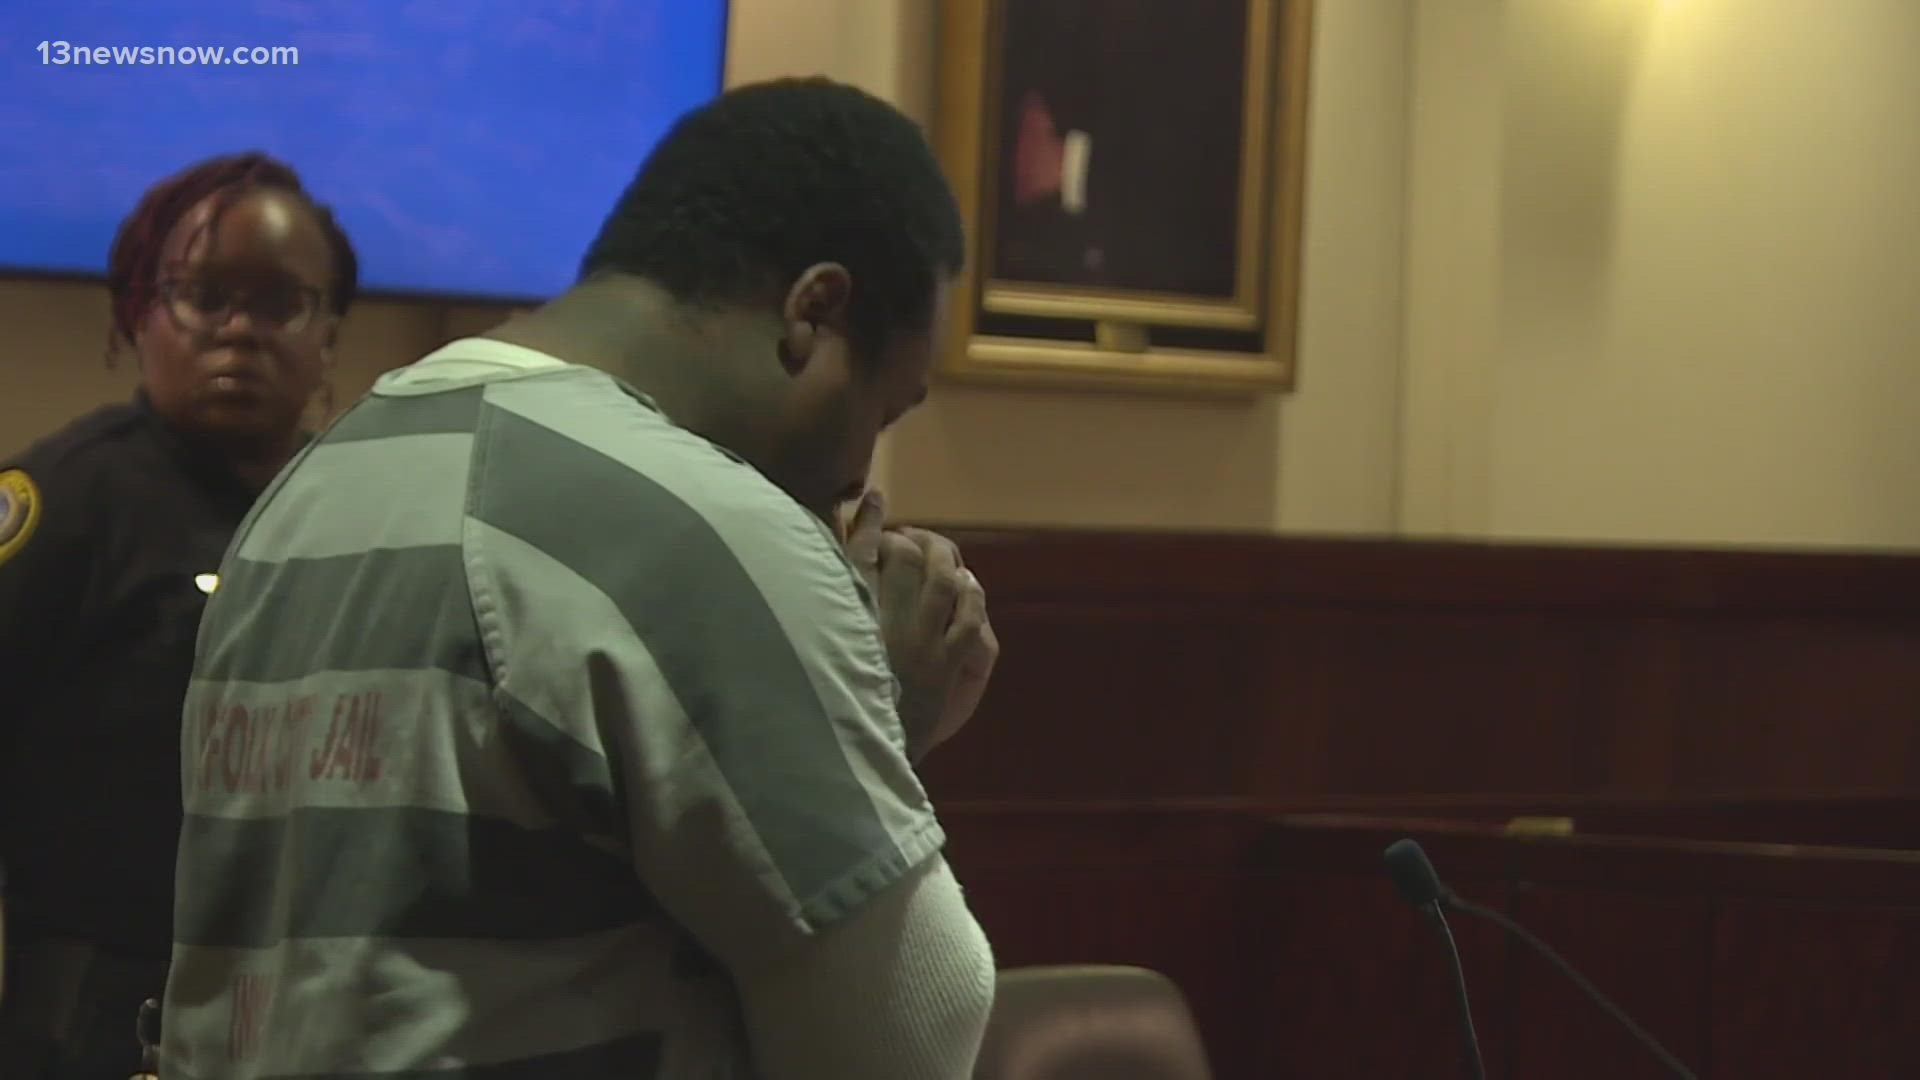 Rashad Dooley was sentenced Friday for conspiracy to commit murder in the death of Chris Cummings.